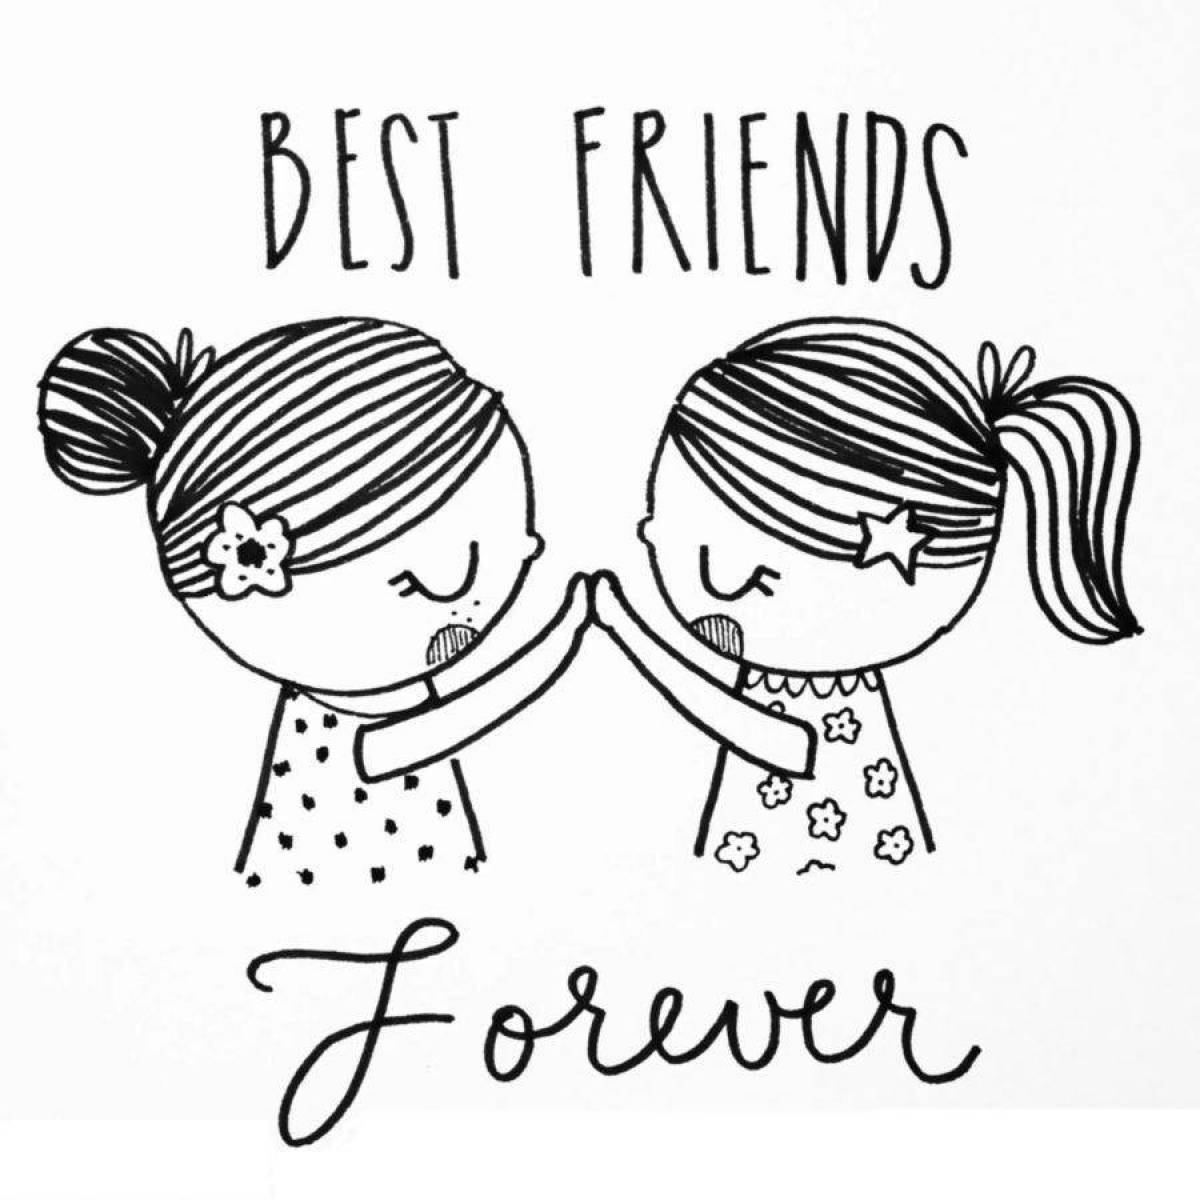 Blessed two friends coloring page